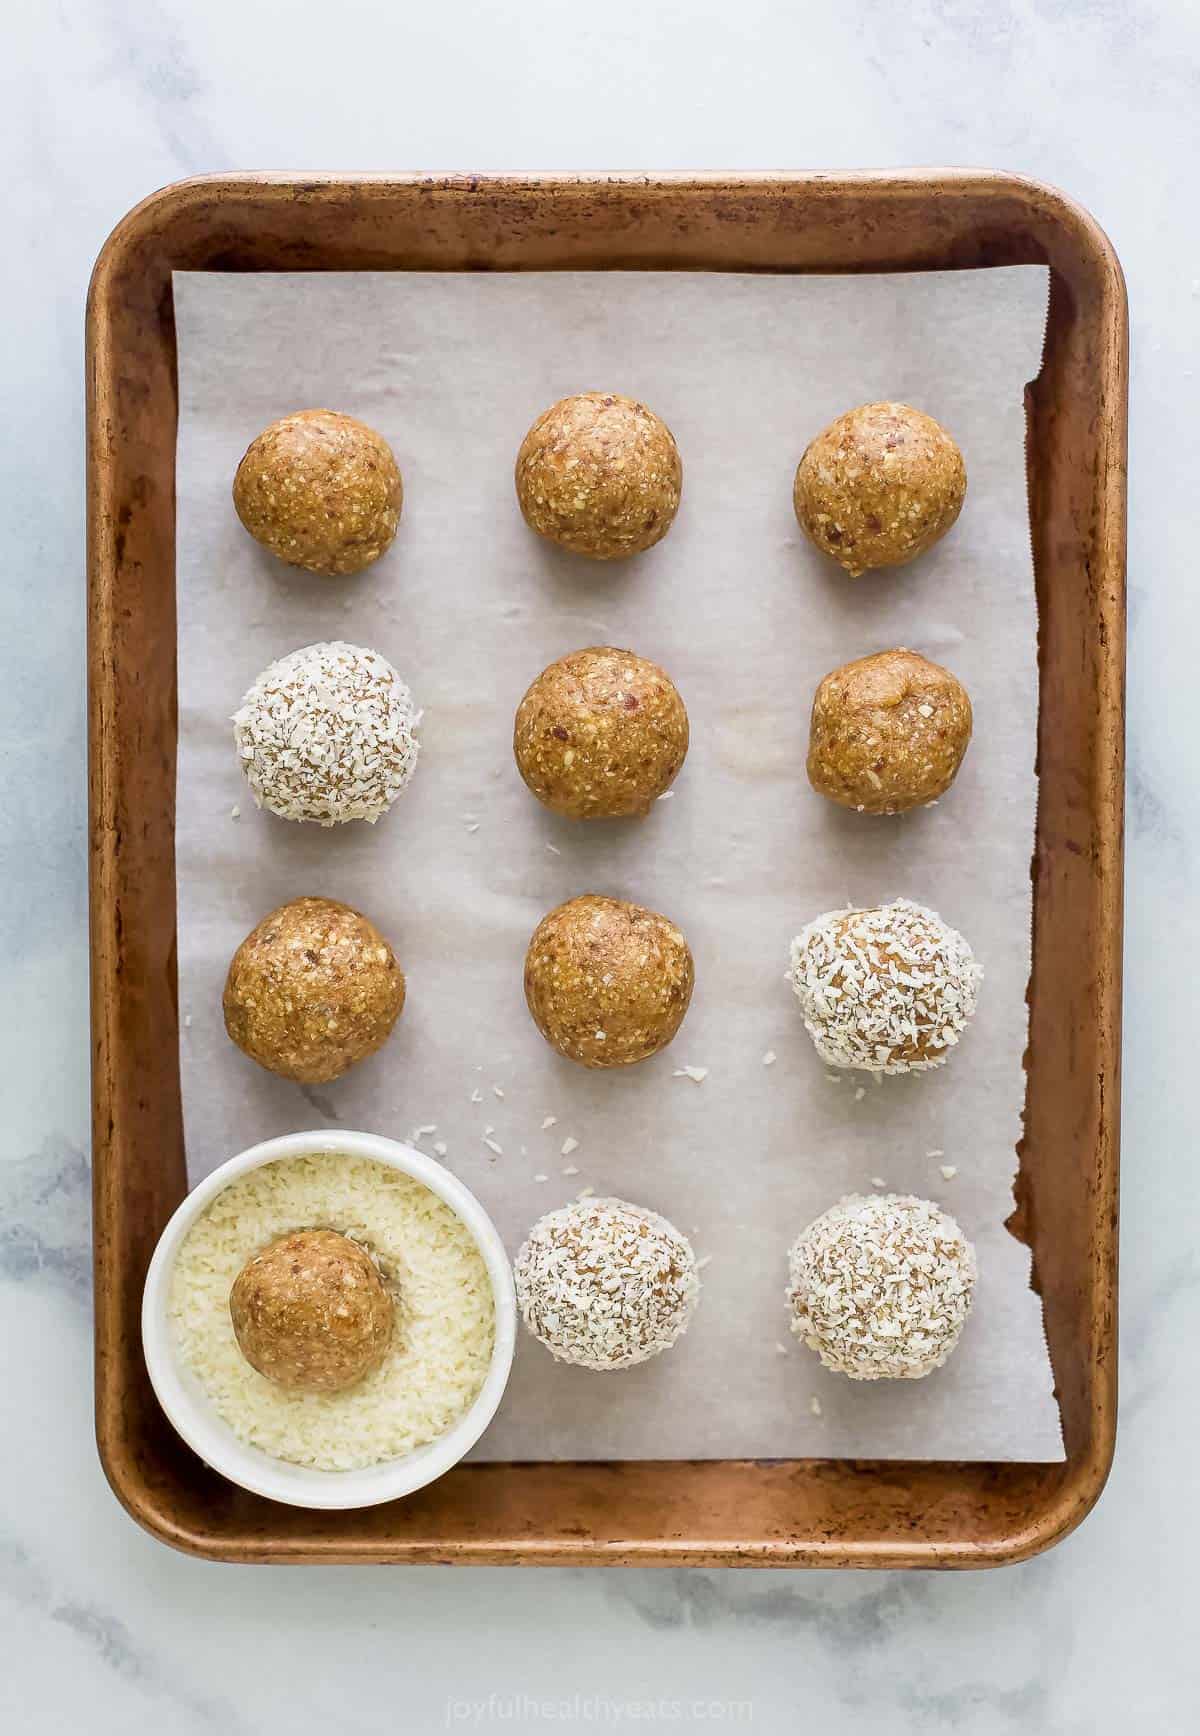 A batch of bliss balls in the process of being coated in shredded coconut on a lined baking sheet